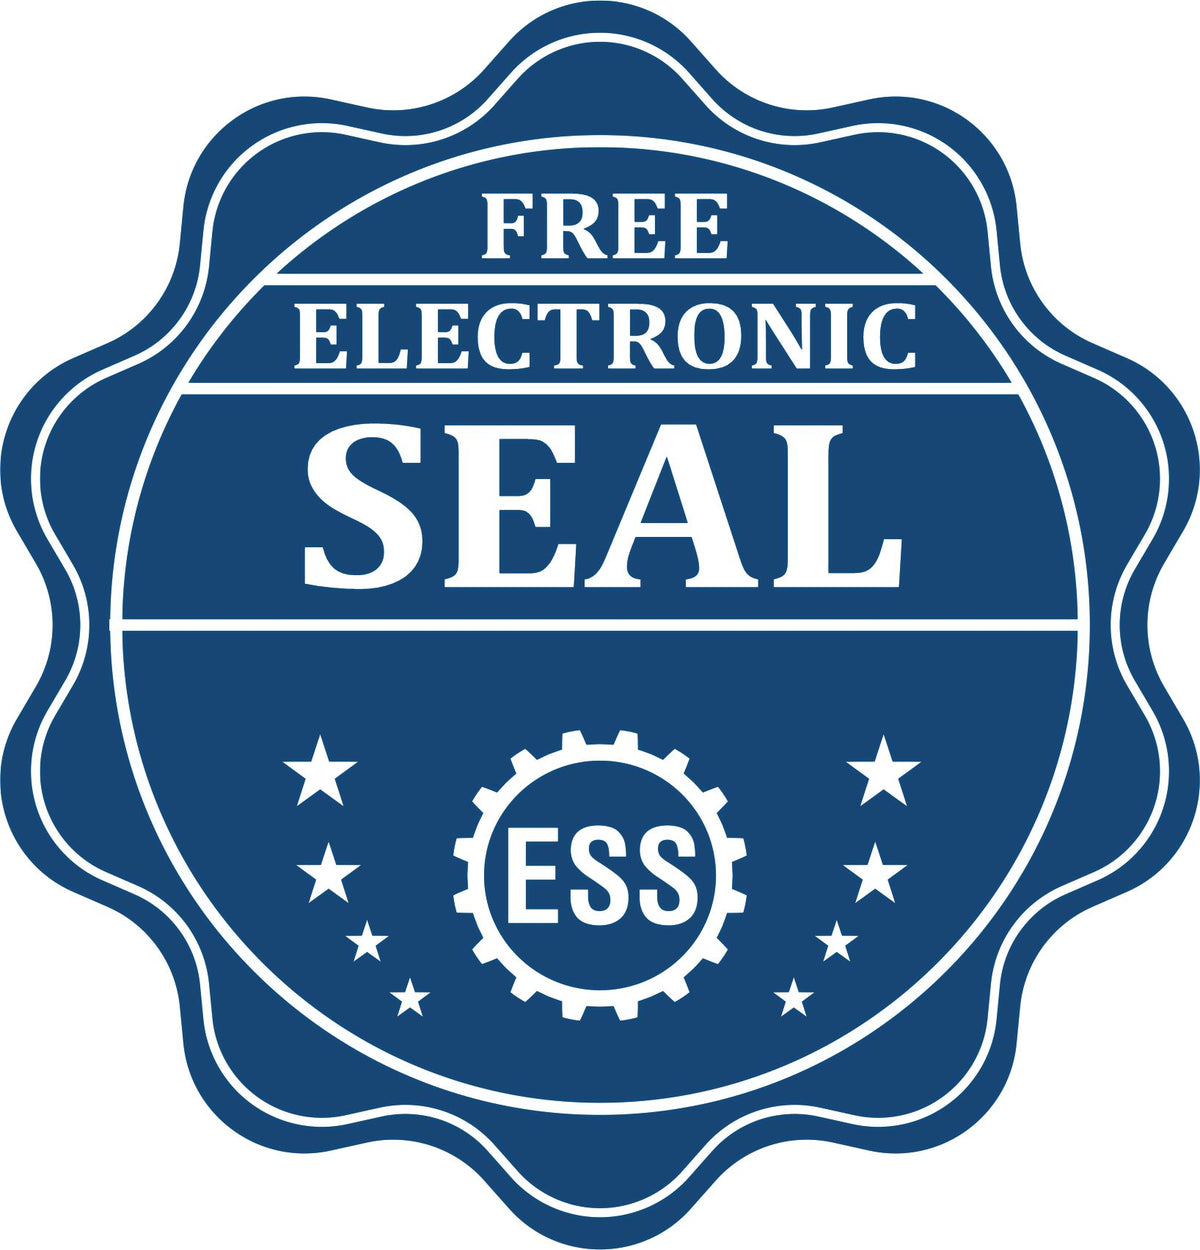 A badge showing a free electronic seal for the Super Slim Minnesota Notary Public Stamp with stars and the ESS gear on the emblem.